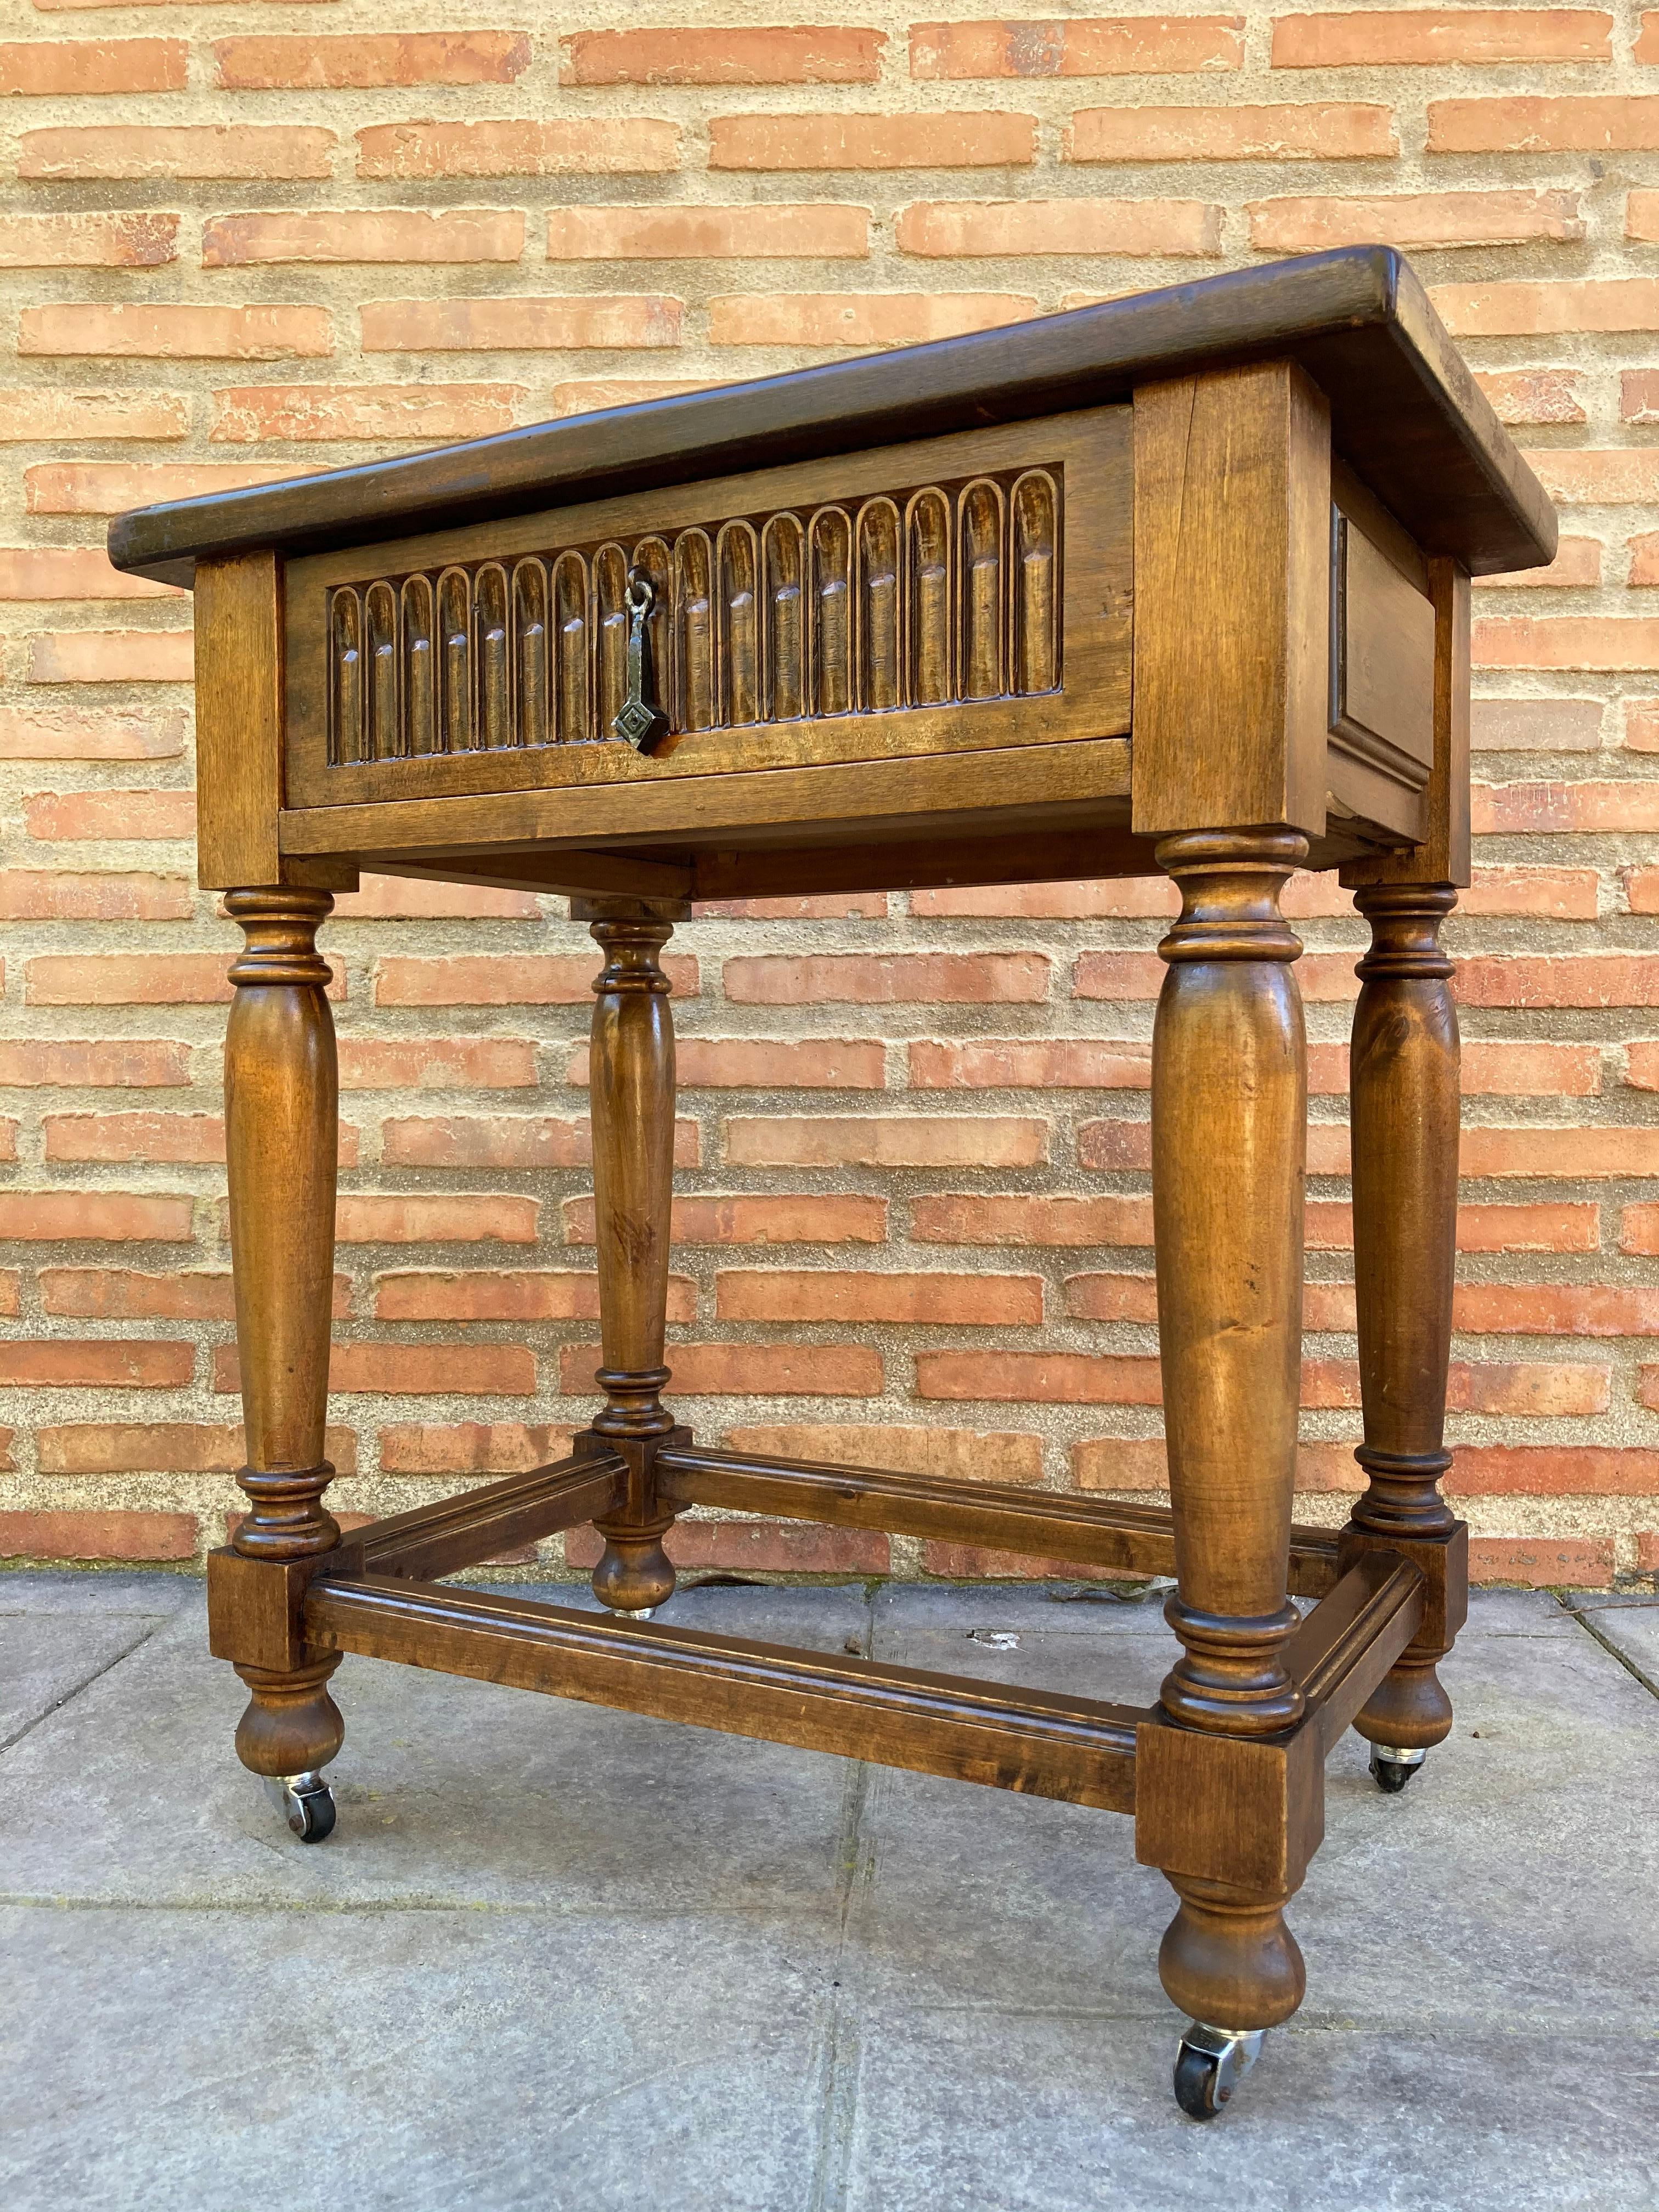 Spanish French Walnut Side Table with Drawer, Carved Arches and Column Legs with Wheels,